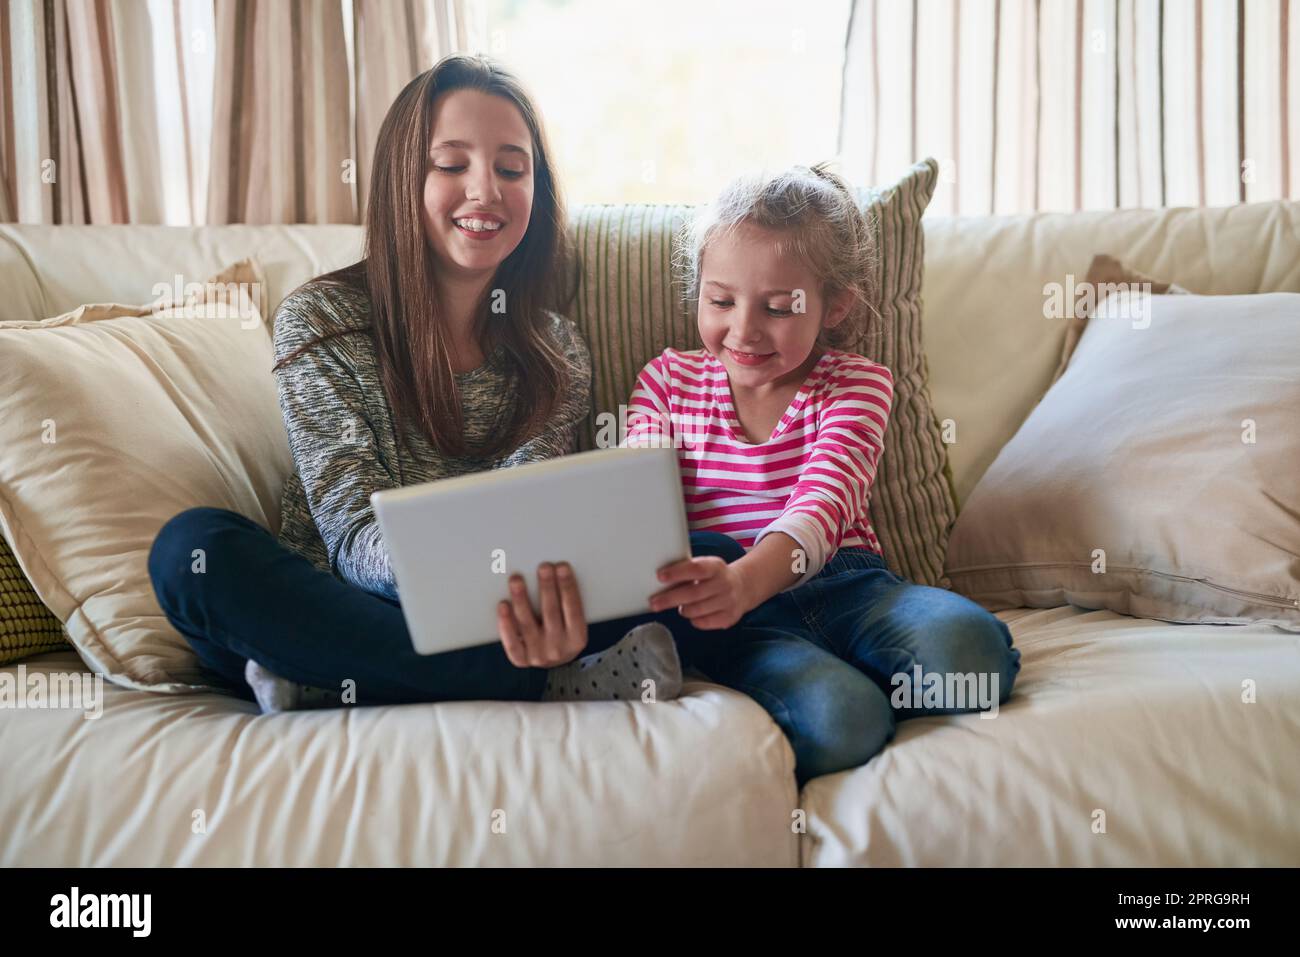 They were born tech savvy. two little girls playing with a tablet while sitting on a sofa at home. Stock Photo